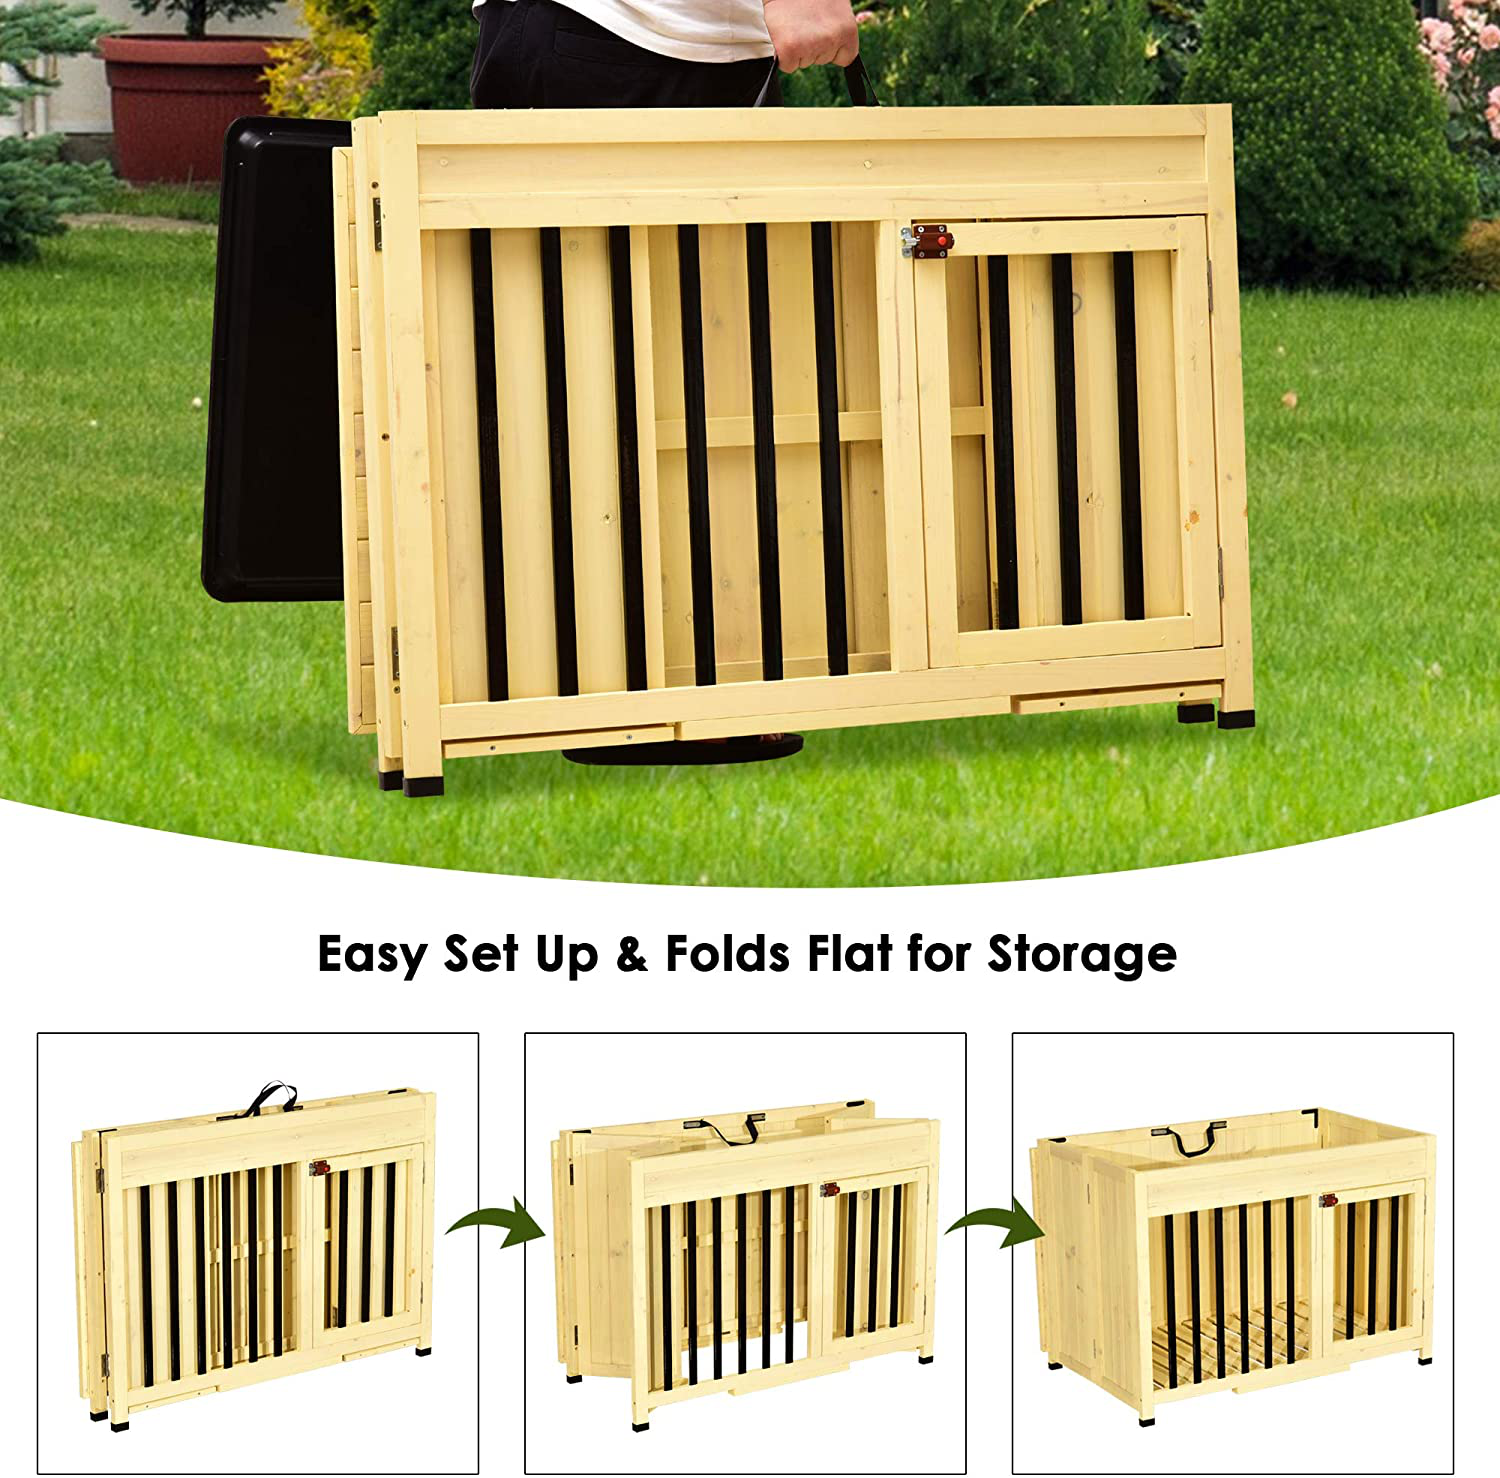 Lovupet Wooden Portable Foldable Pet Crate Indoor Outdoor Dog Kennel Pet Cage with Tray Animals & Pet Supplies > Pet Supplies > Dog Supplies > Dog Houses Lovupet   